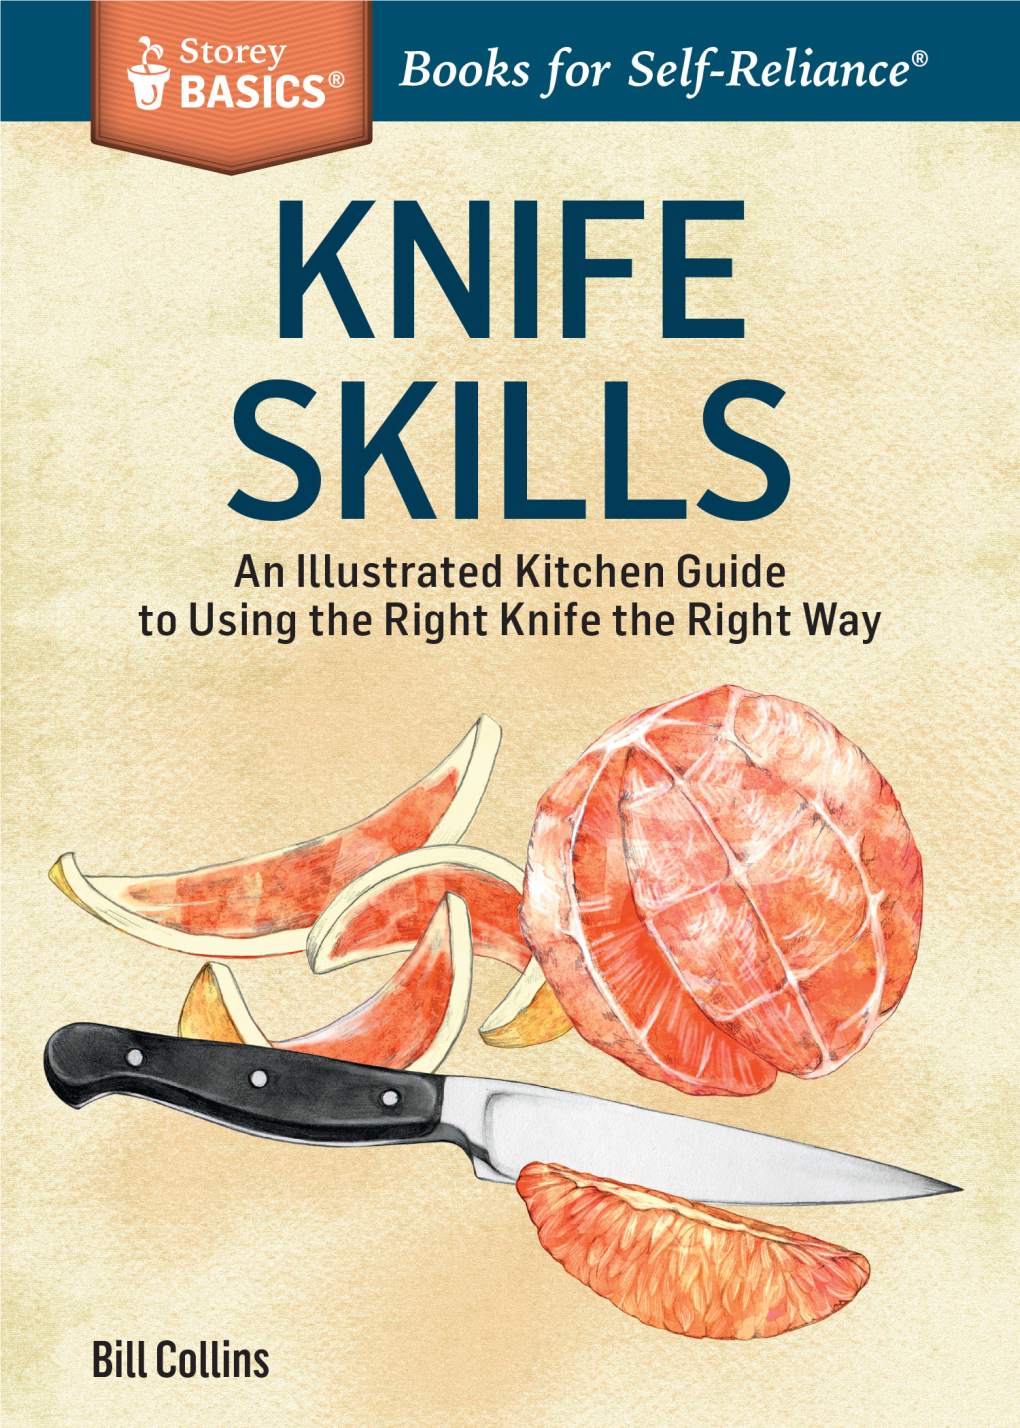 KNIFE SKILLS an Illustrated Kitchen Guide to Using the Right Knife the Right Way